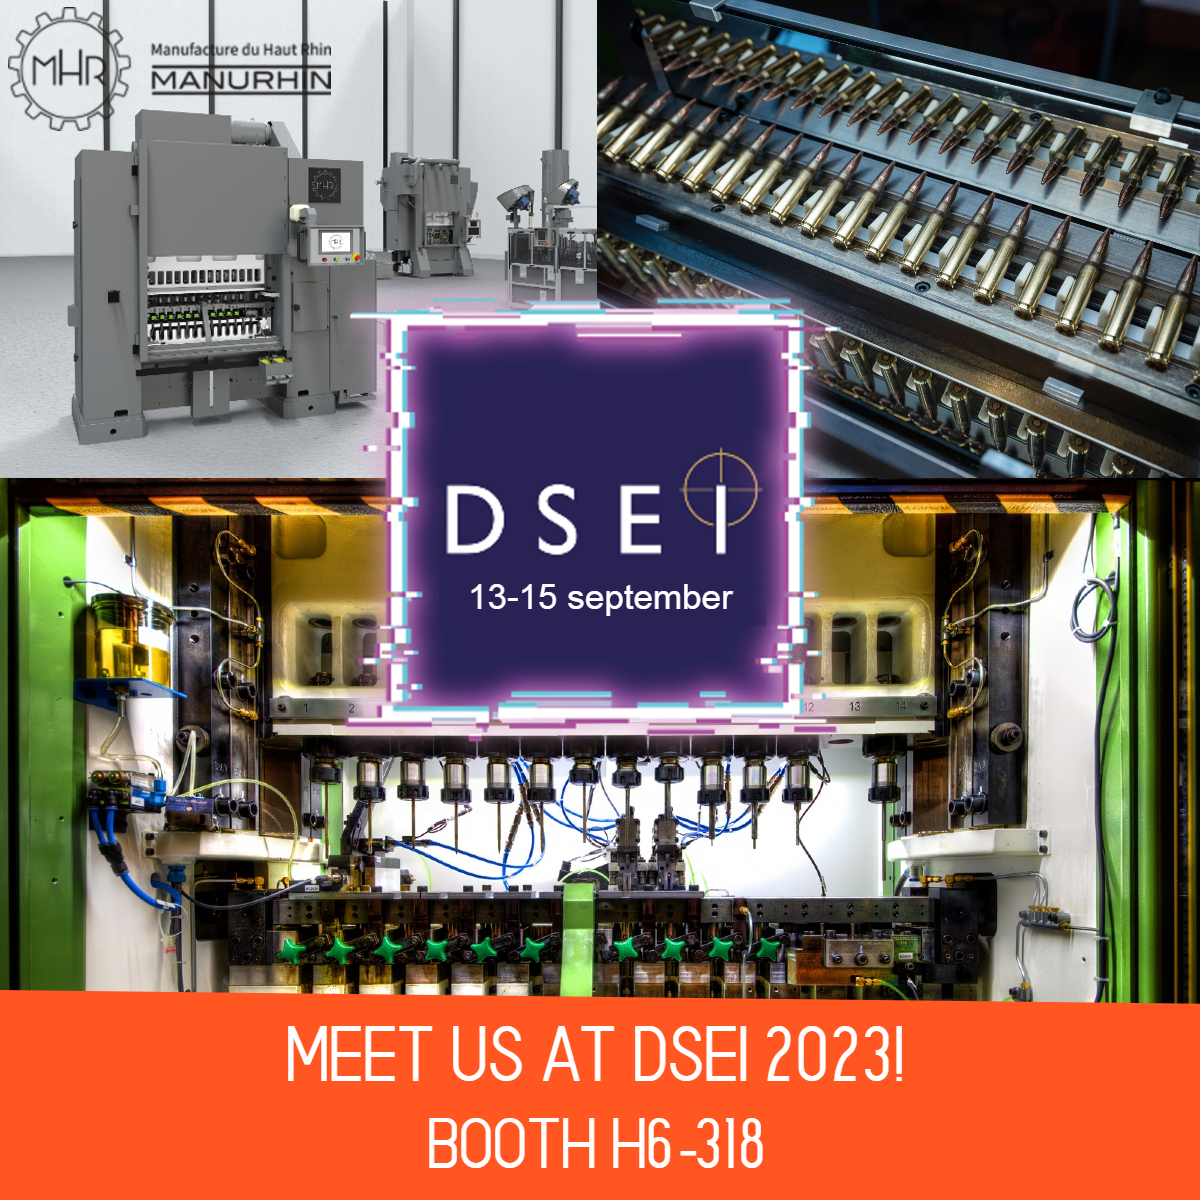 Manurhin will be present at DSEI London,  from 12 to 15 September 2023